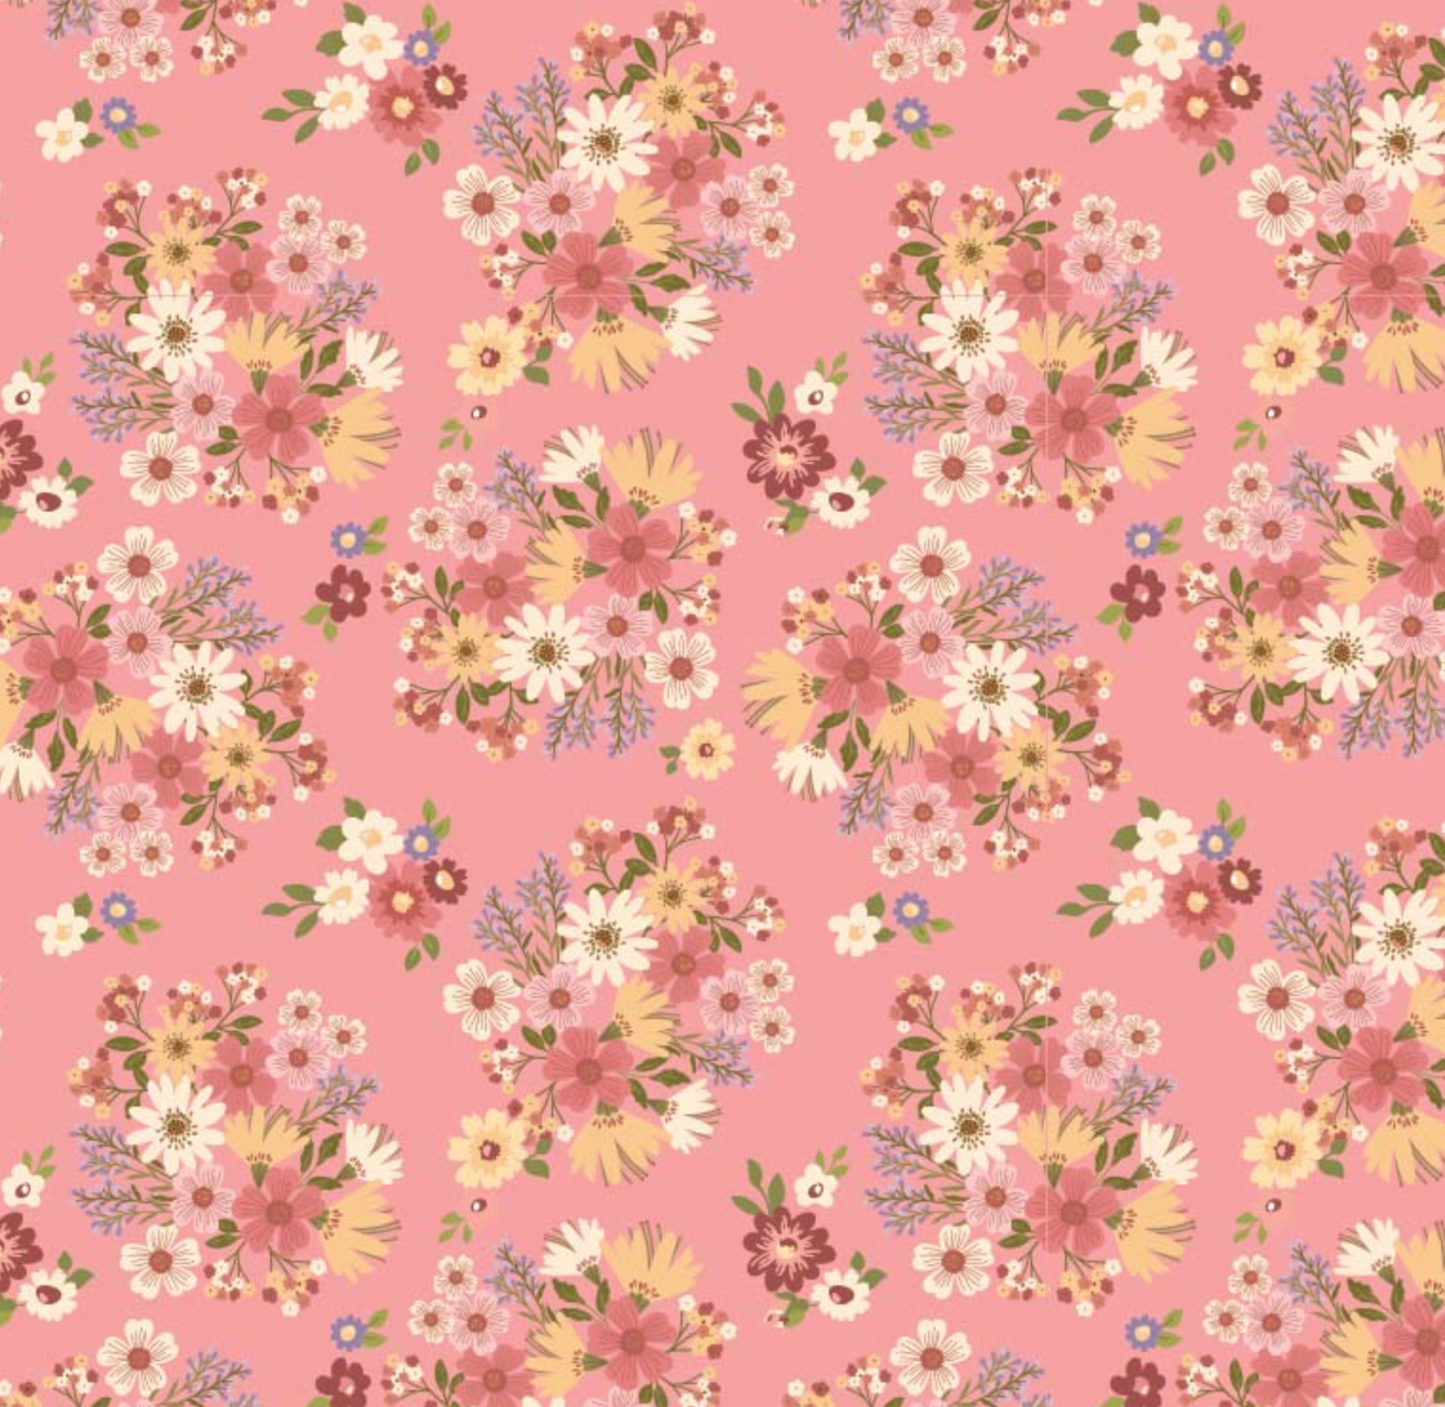 Nature Sings Fabric, Send Her Flowers, Pink, NS24101, sold by the 1/2 yard, *PREORDER